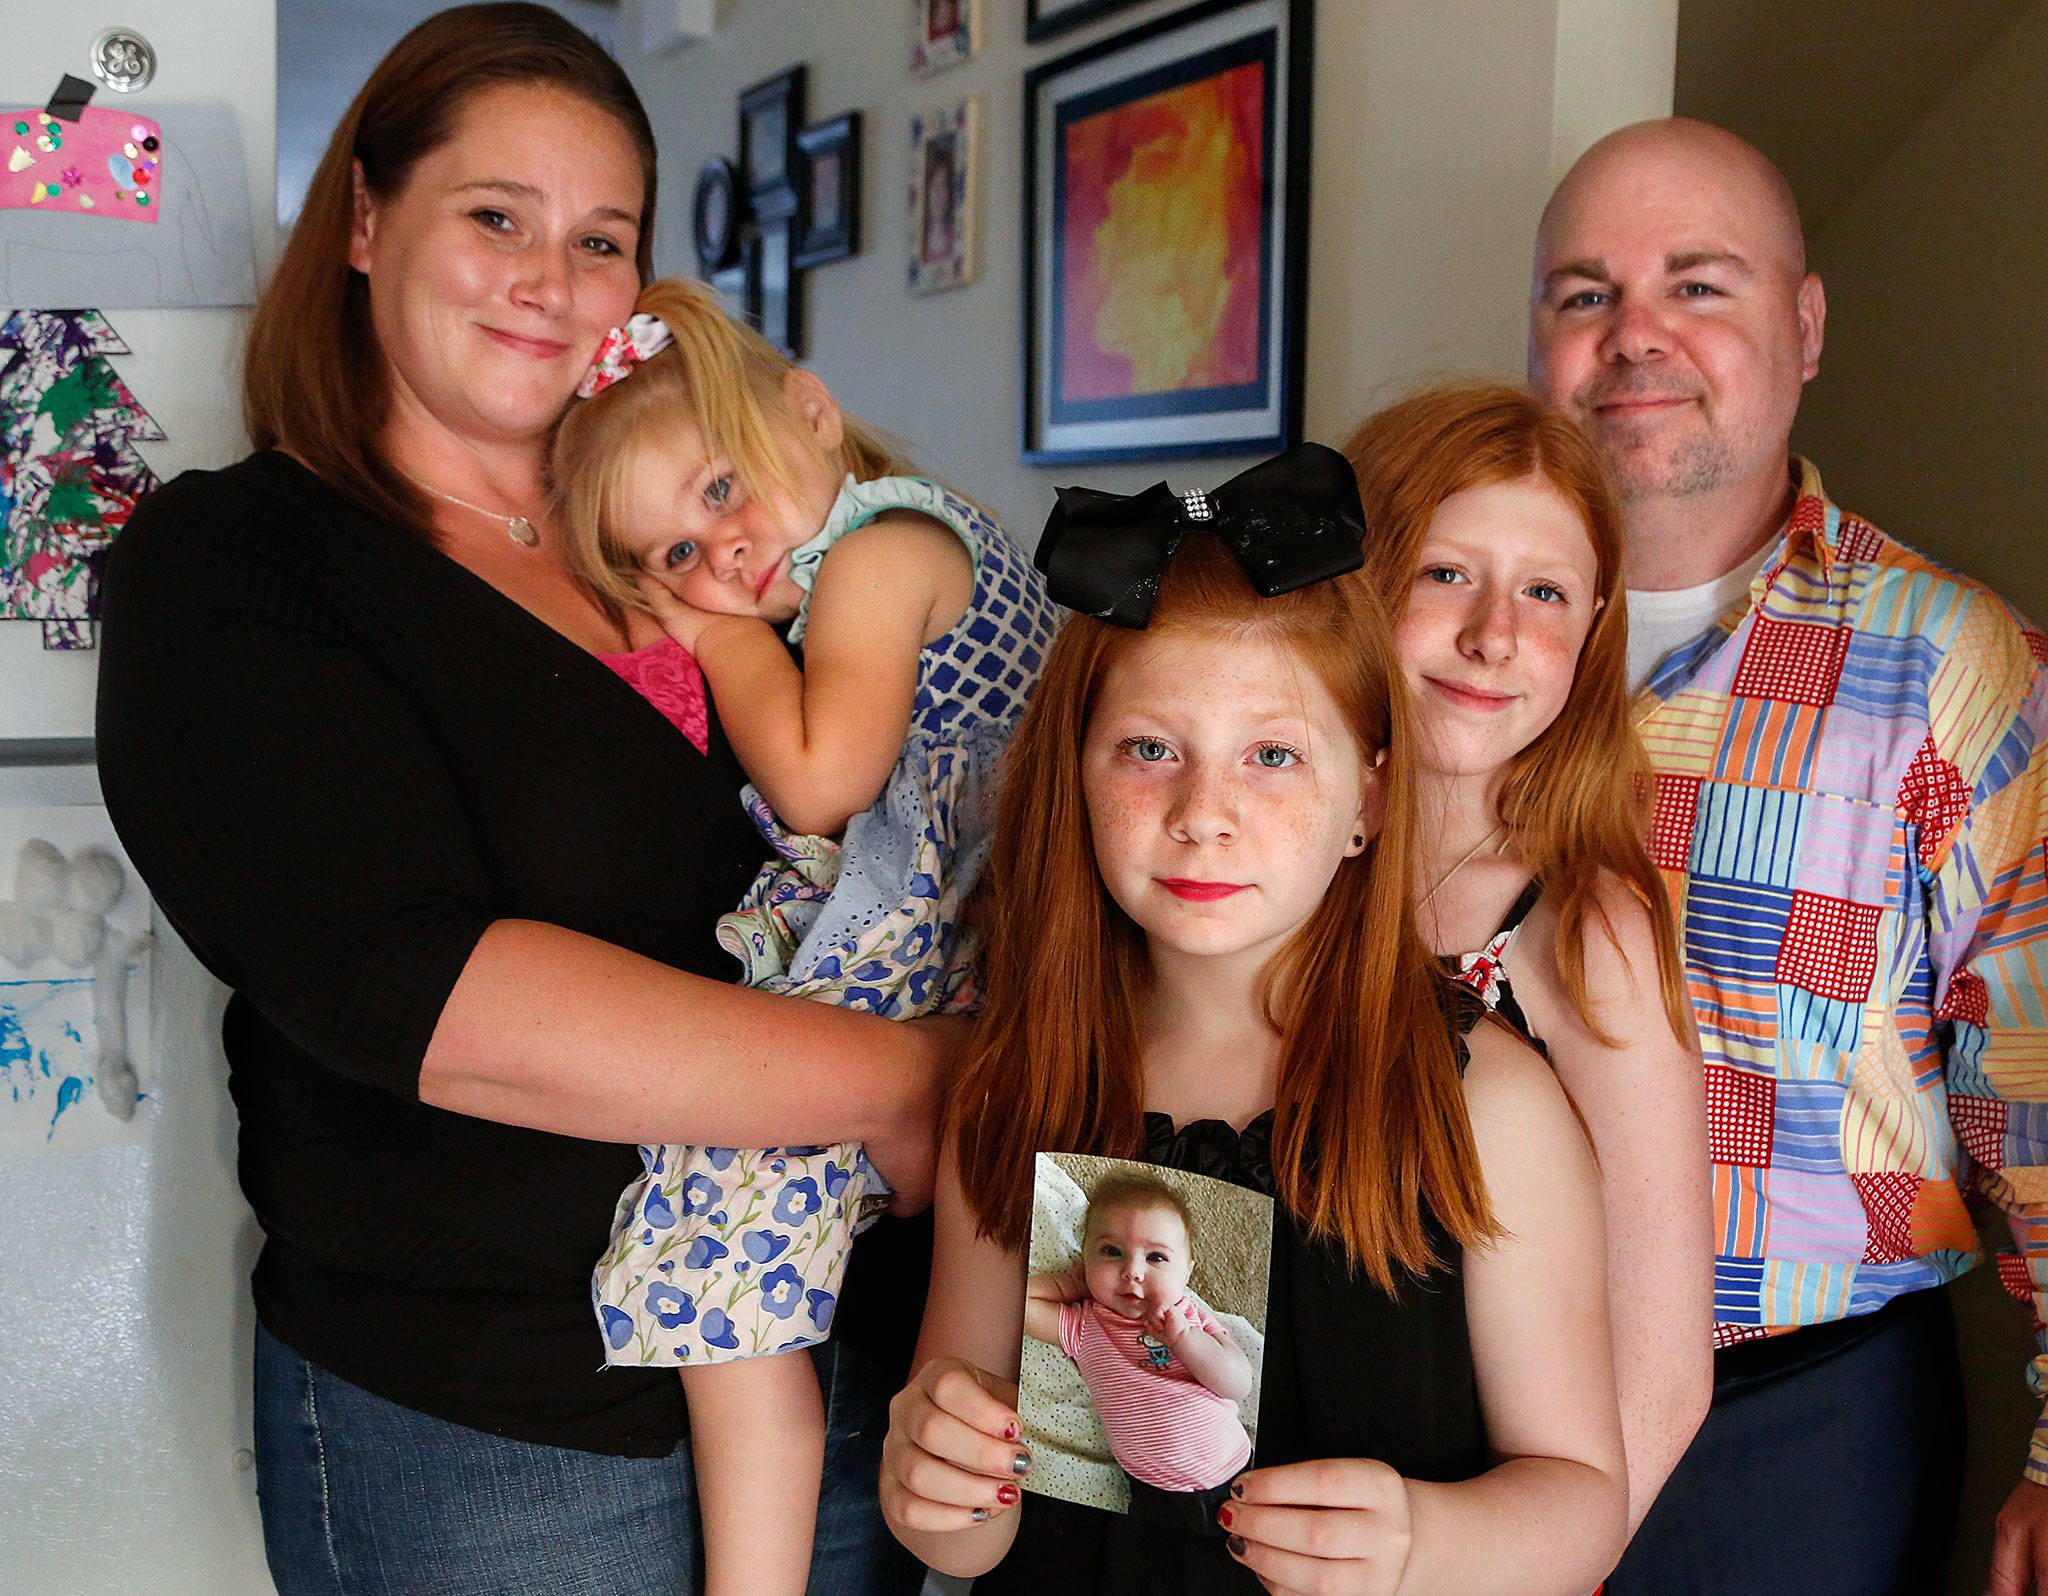 The Nickerson family from left, Olivia, Willow, 3, Ryleigh, 10 (holding photo of Rowan, who died at 7 months), Aubrey, 12, and Joshua. Losing the littlest one to SIDS has been heartbreaking for everyone. But, knowing two other babies are living because of Rowan’s donated heart valves has provided some comfort. (Dan Bates / The Herald)